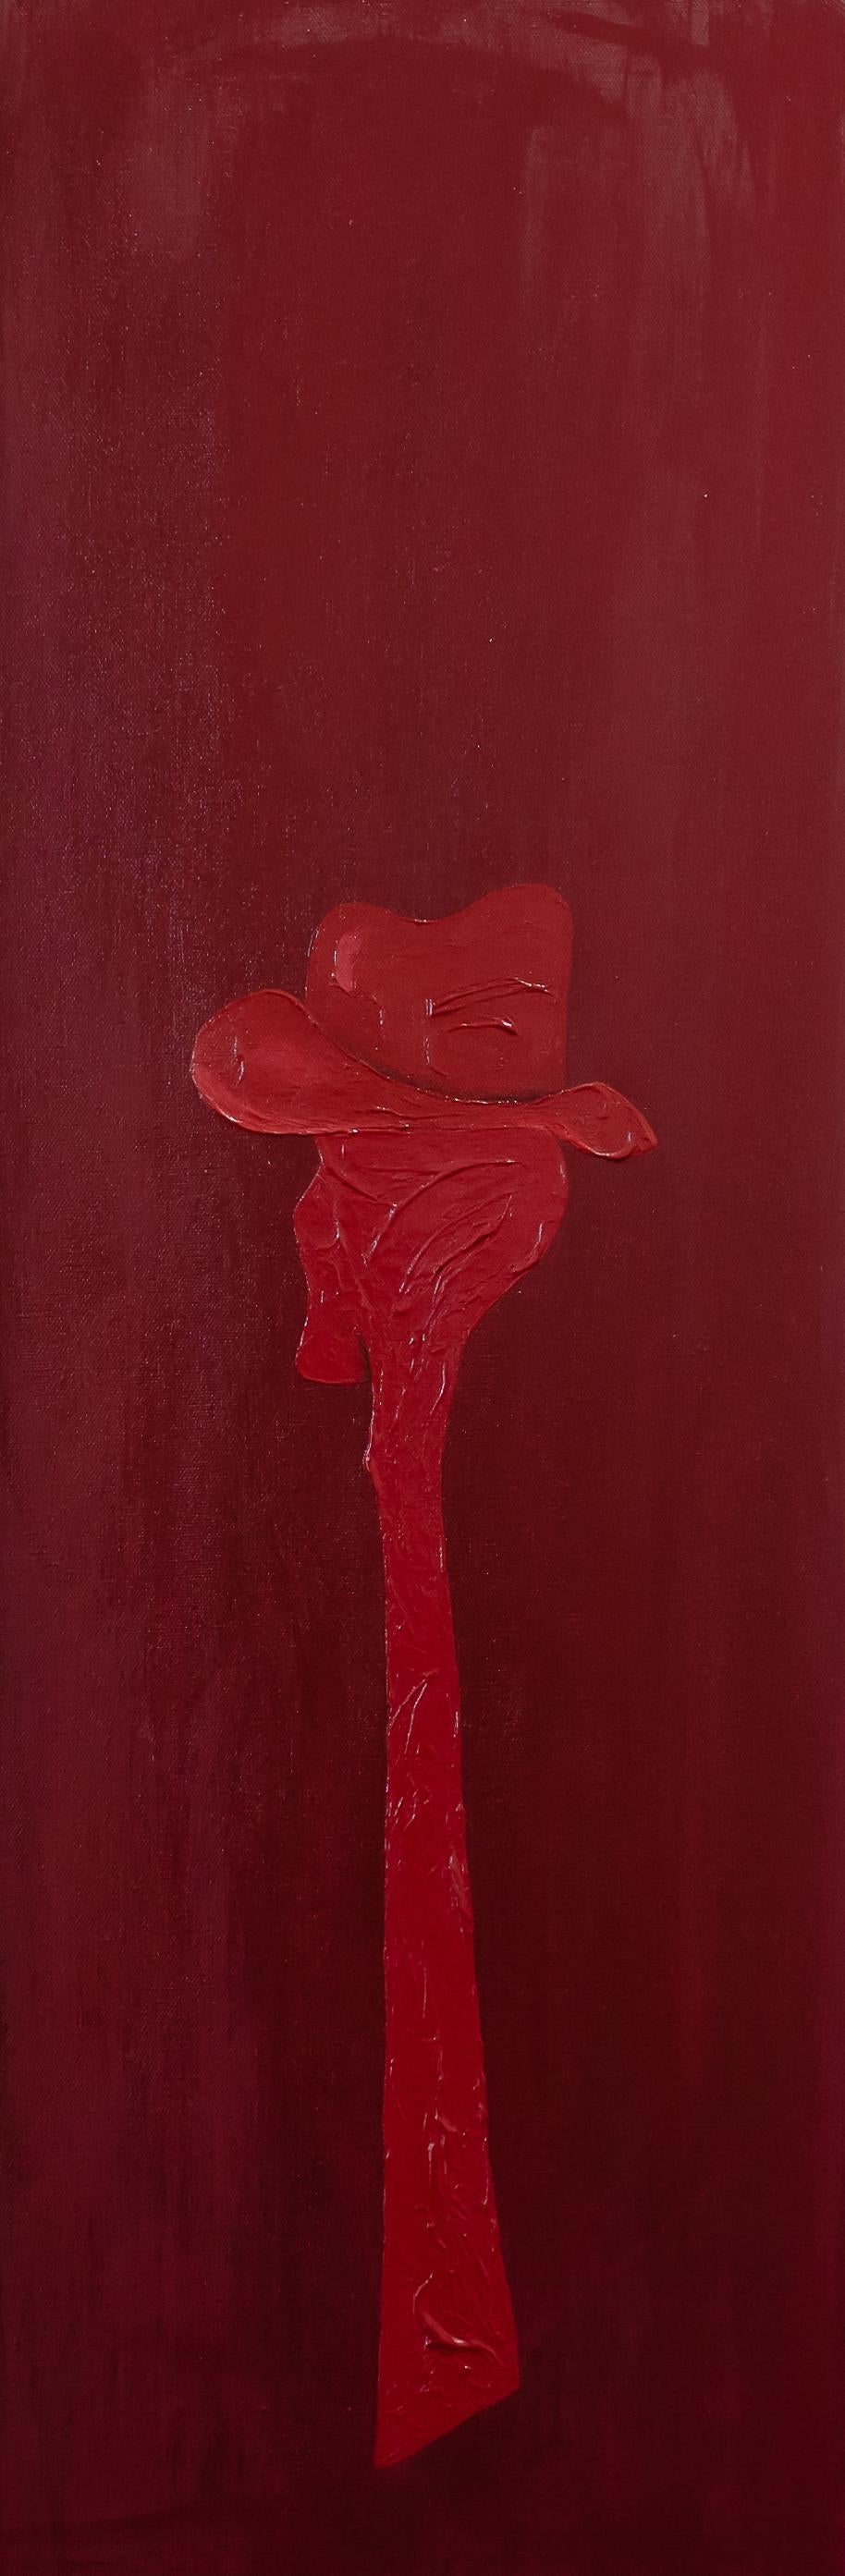 Red Cowboy - Painting by Trenity Thomas